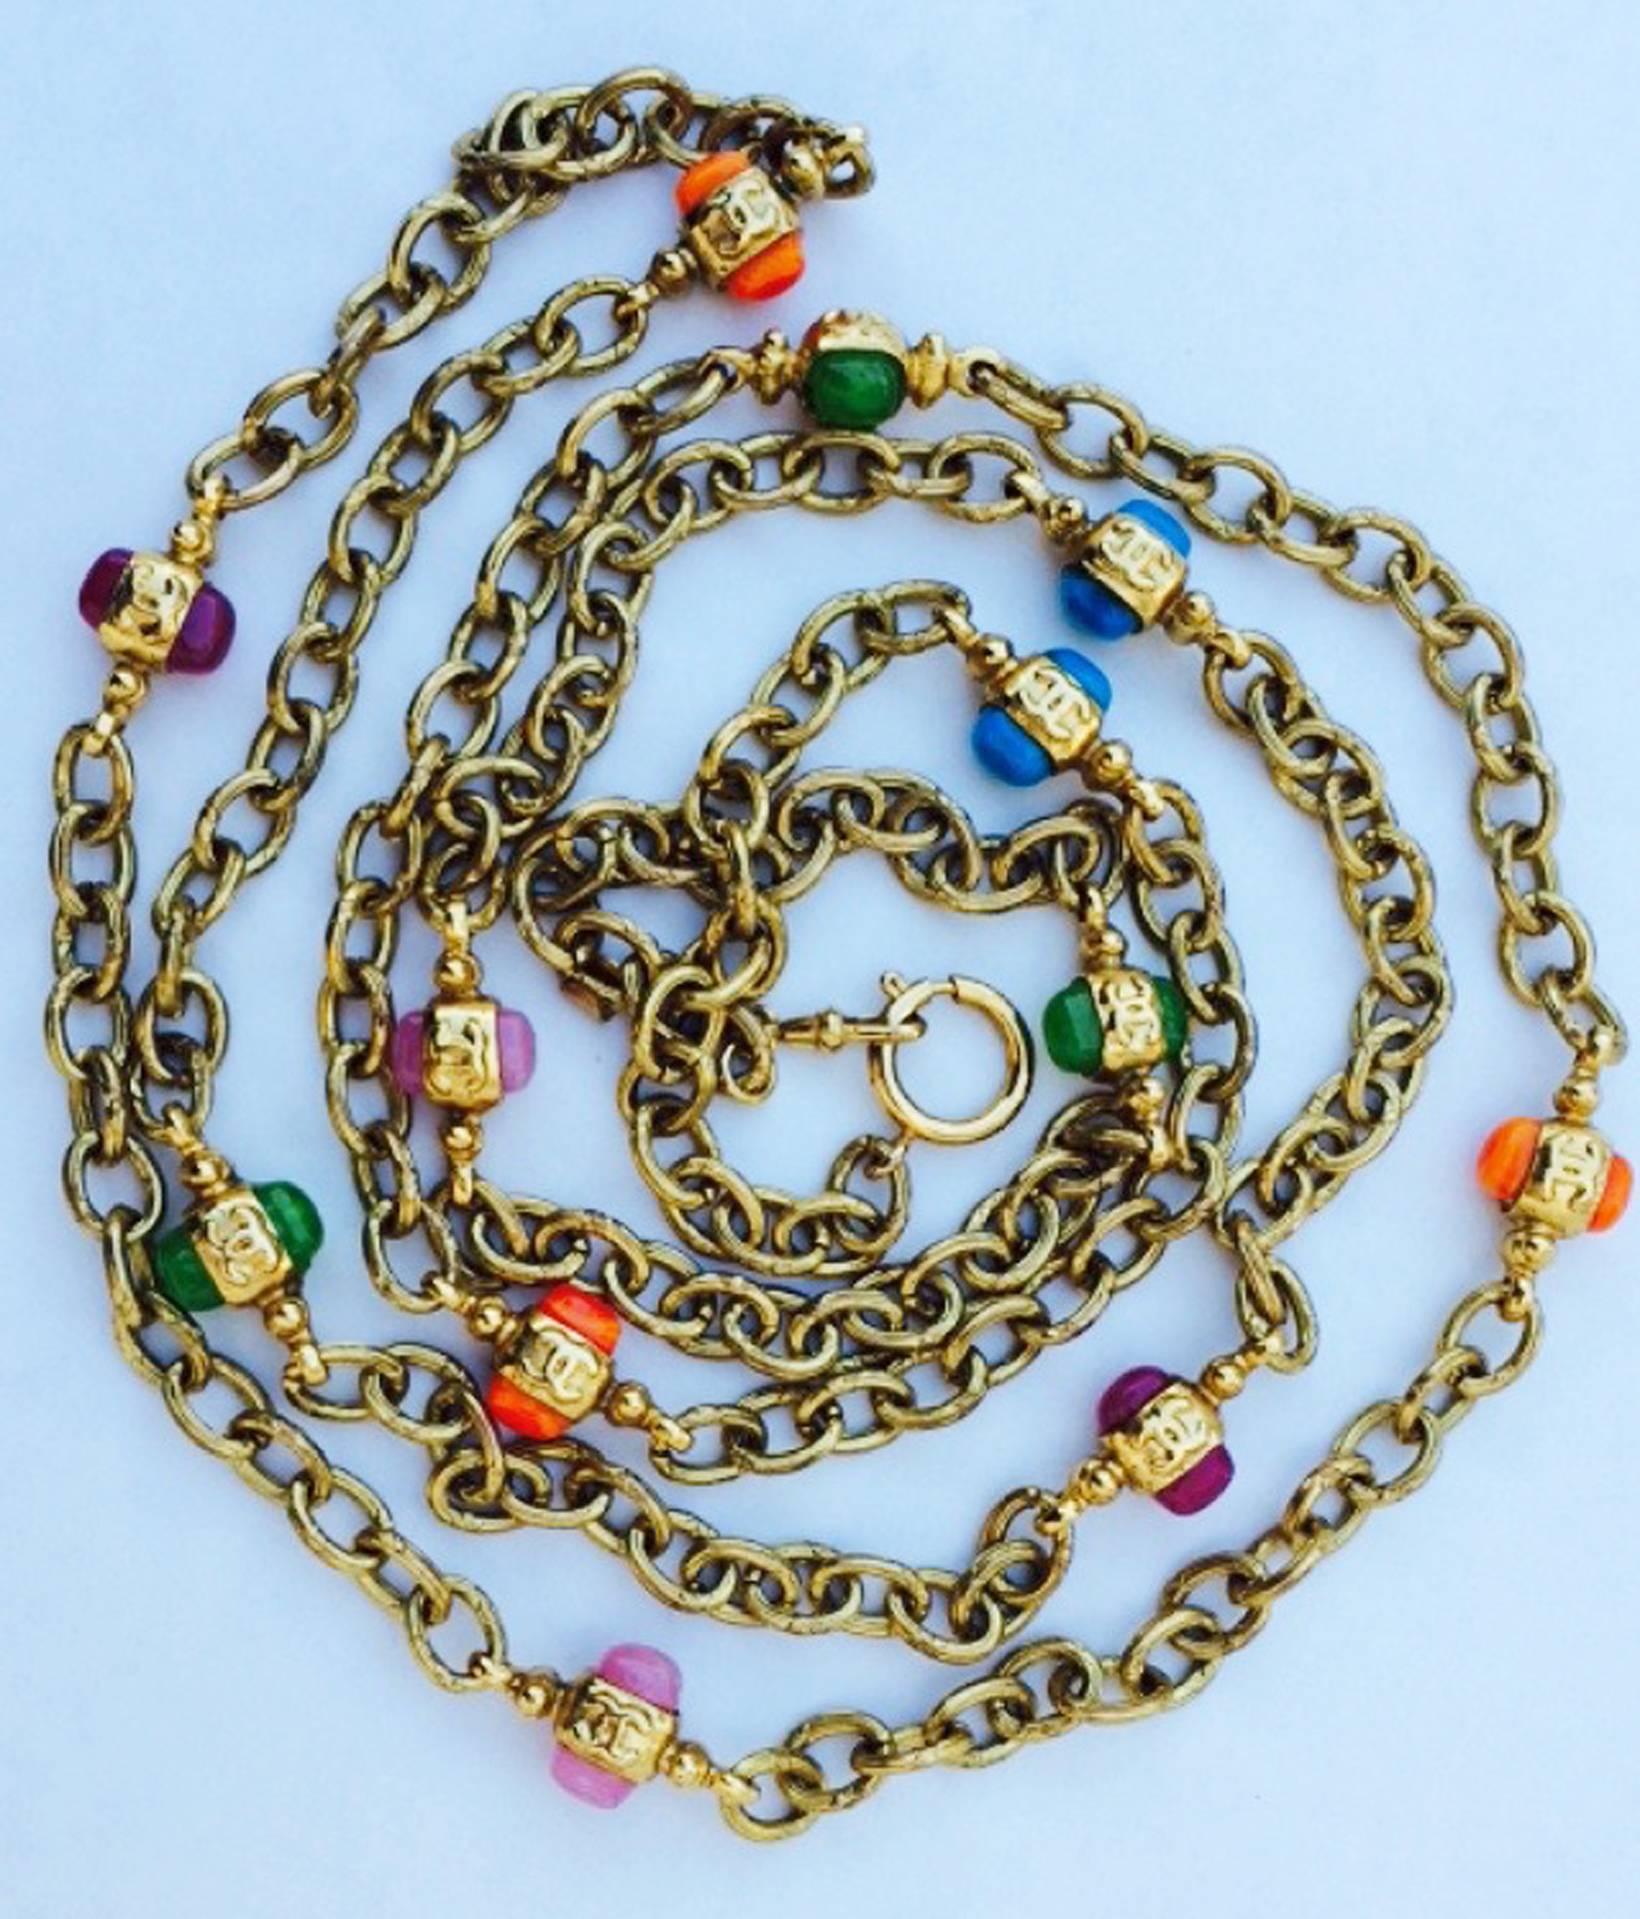 A fine and rare vintage Chanel sautoir necklace. Signed gilt metal chain linked item features poured glass stations and original locking clasp. Excellent with no issues.